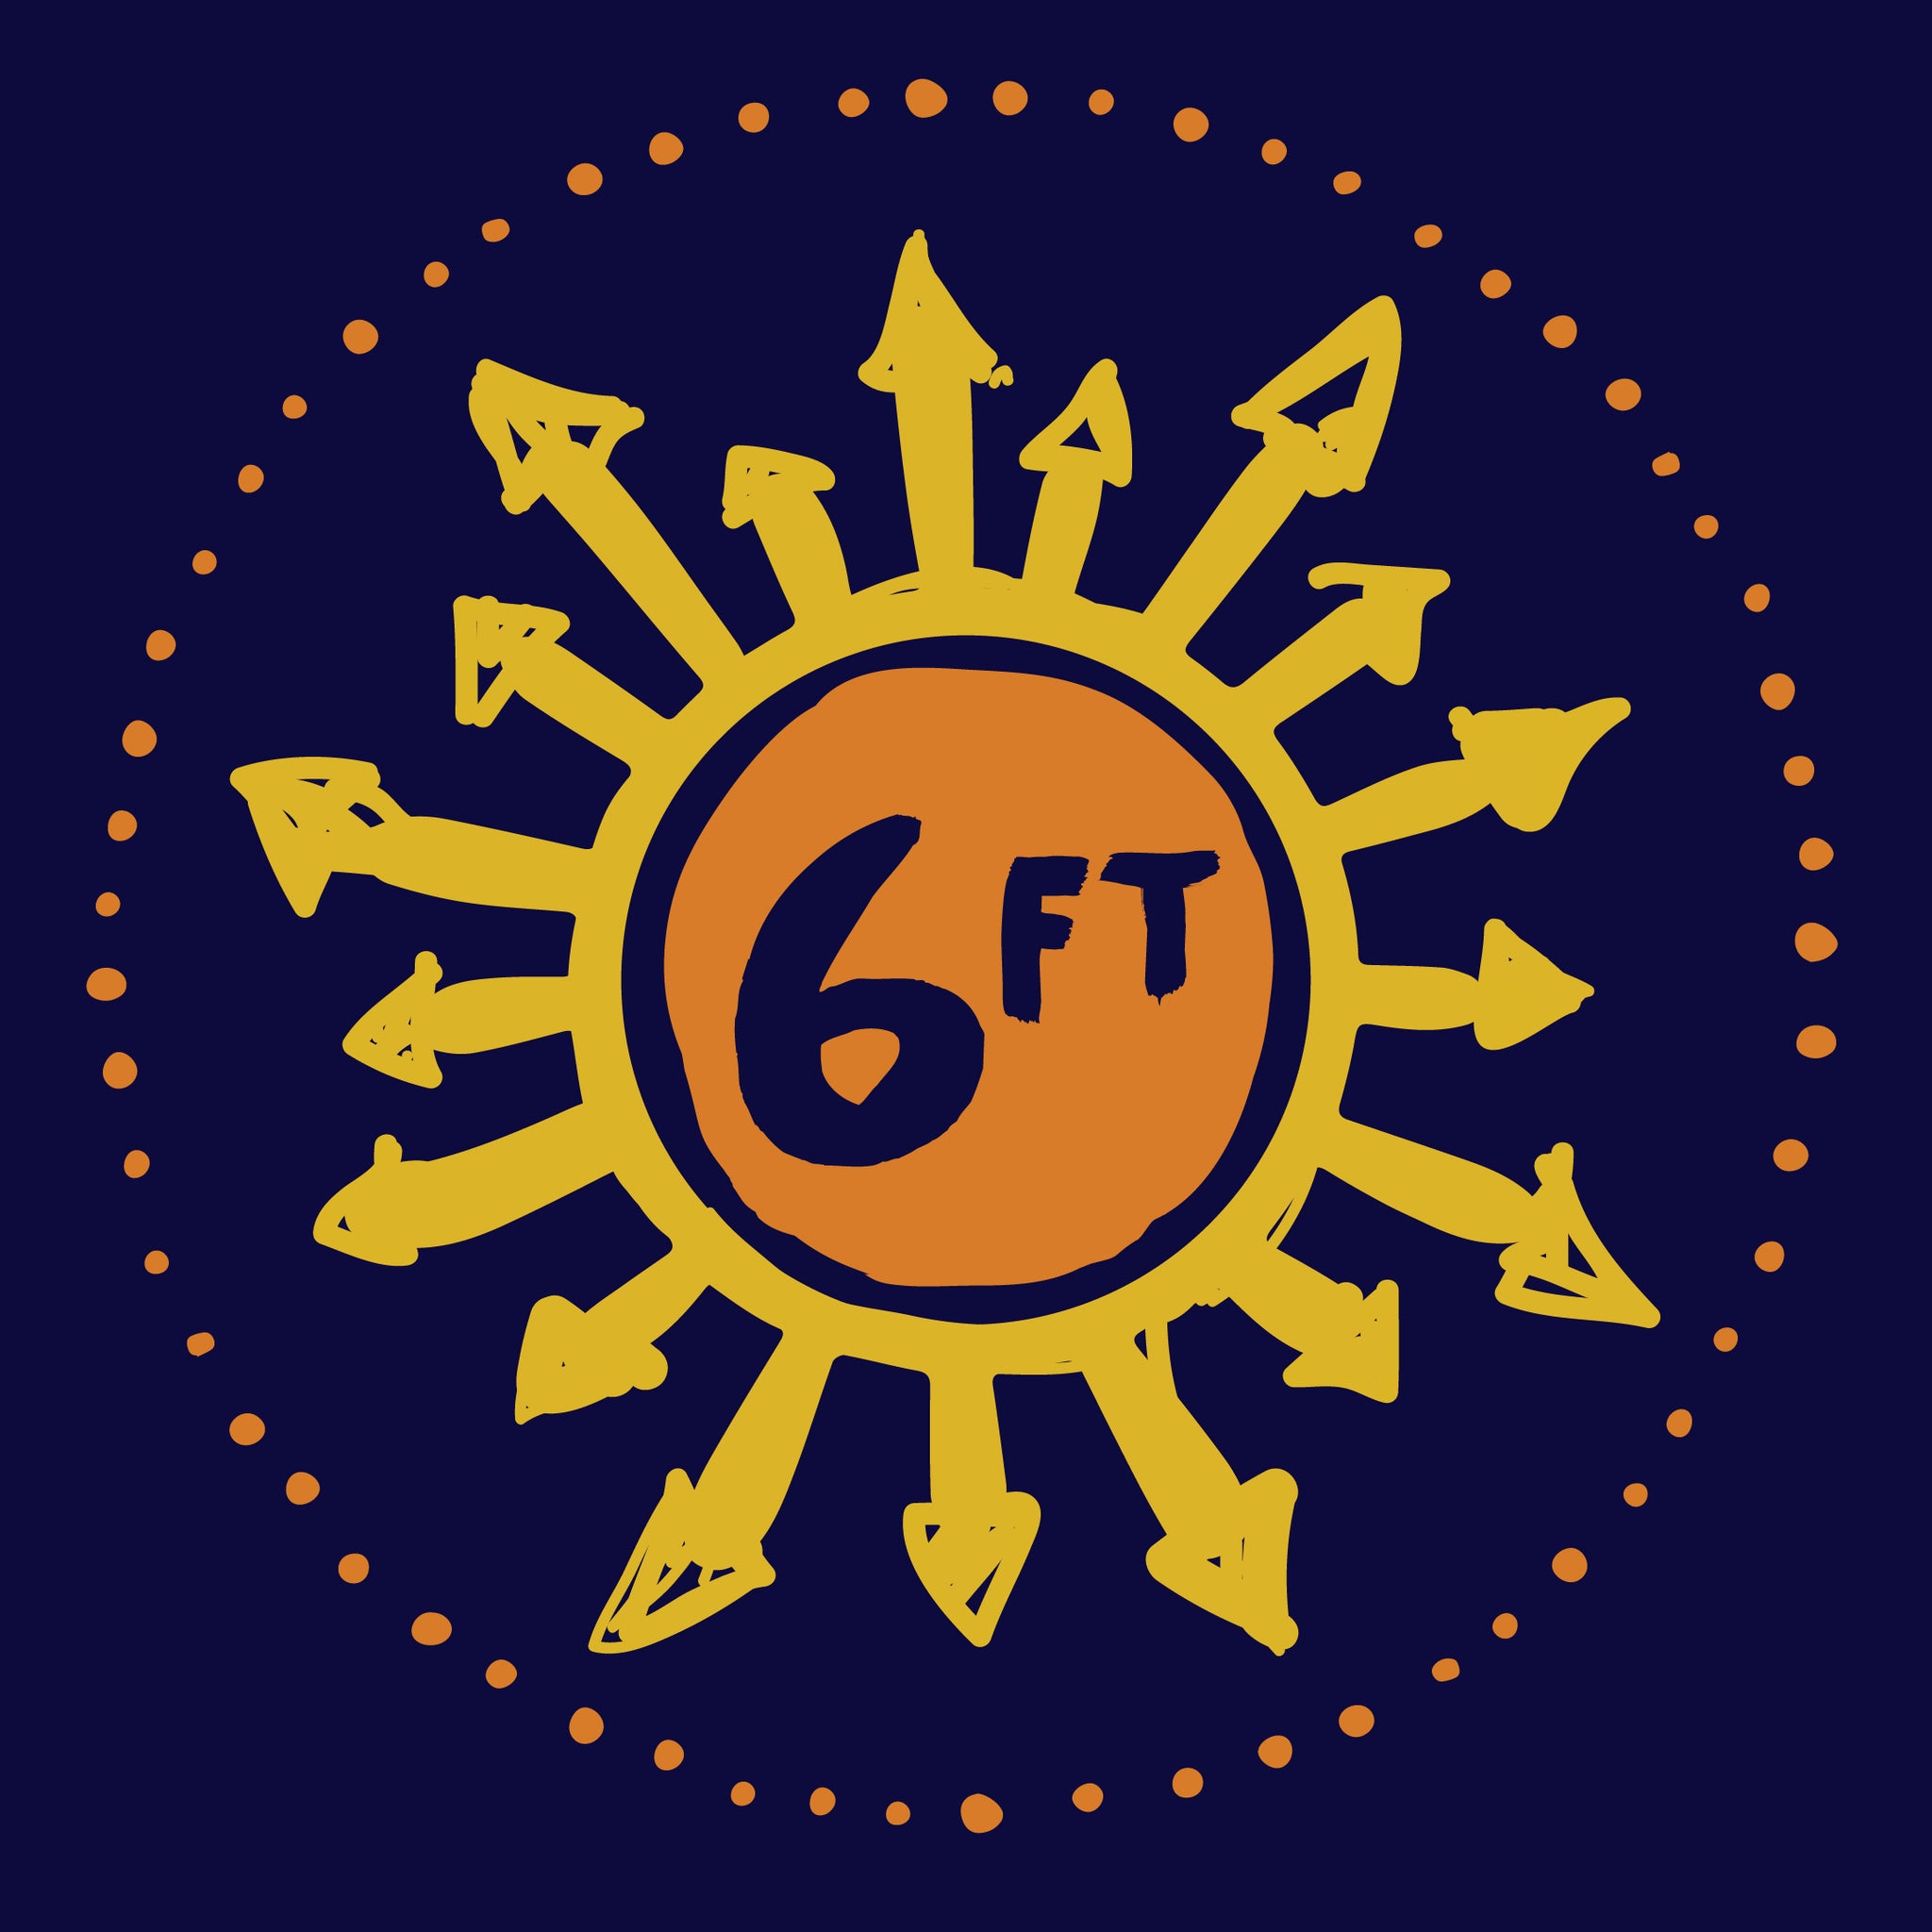 design with a sun made up of 6ft in the center and arrows going out in yellow and orange on navy blue background